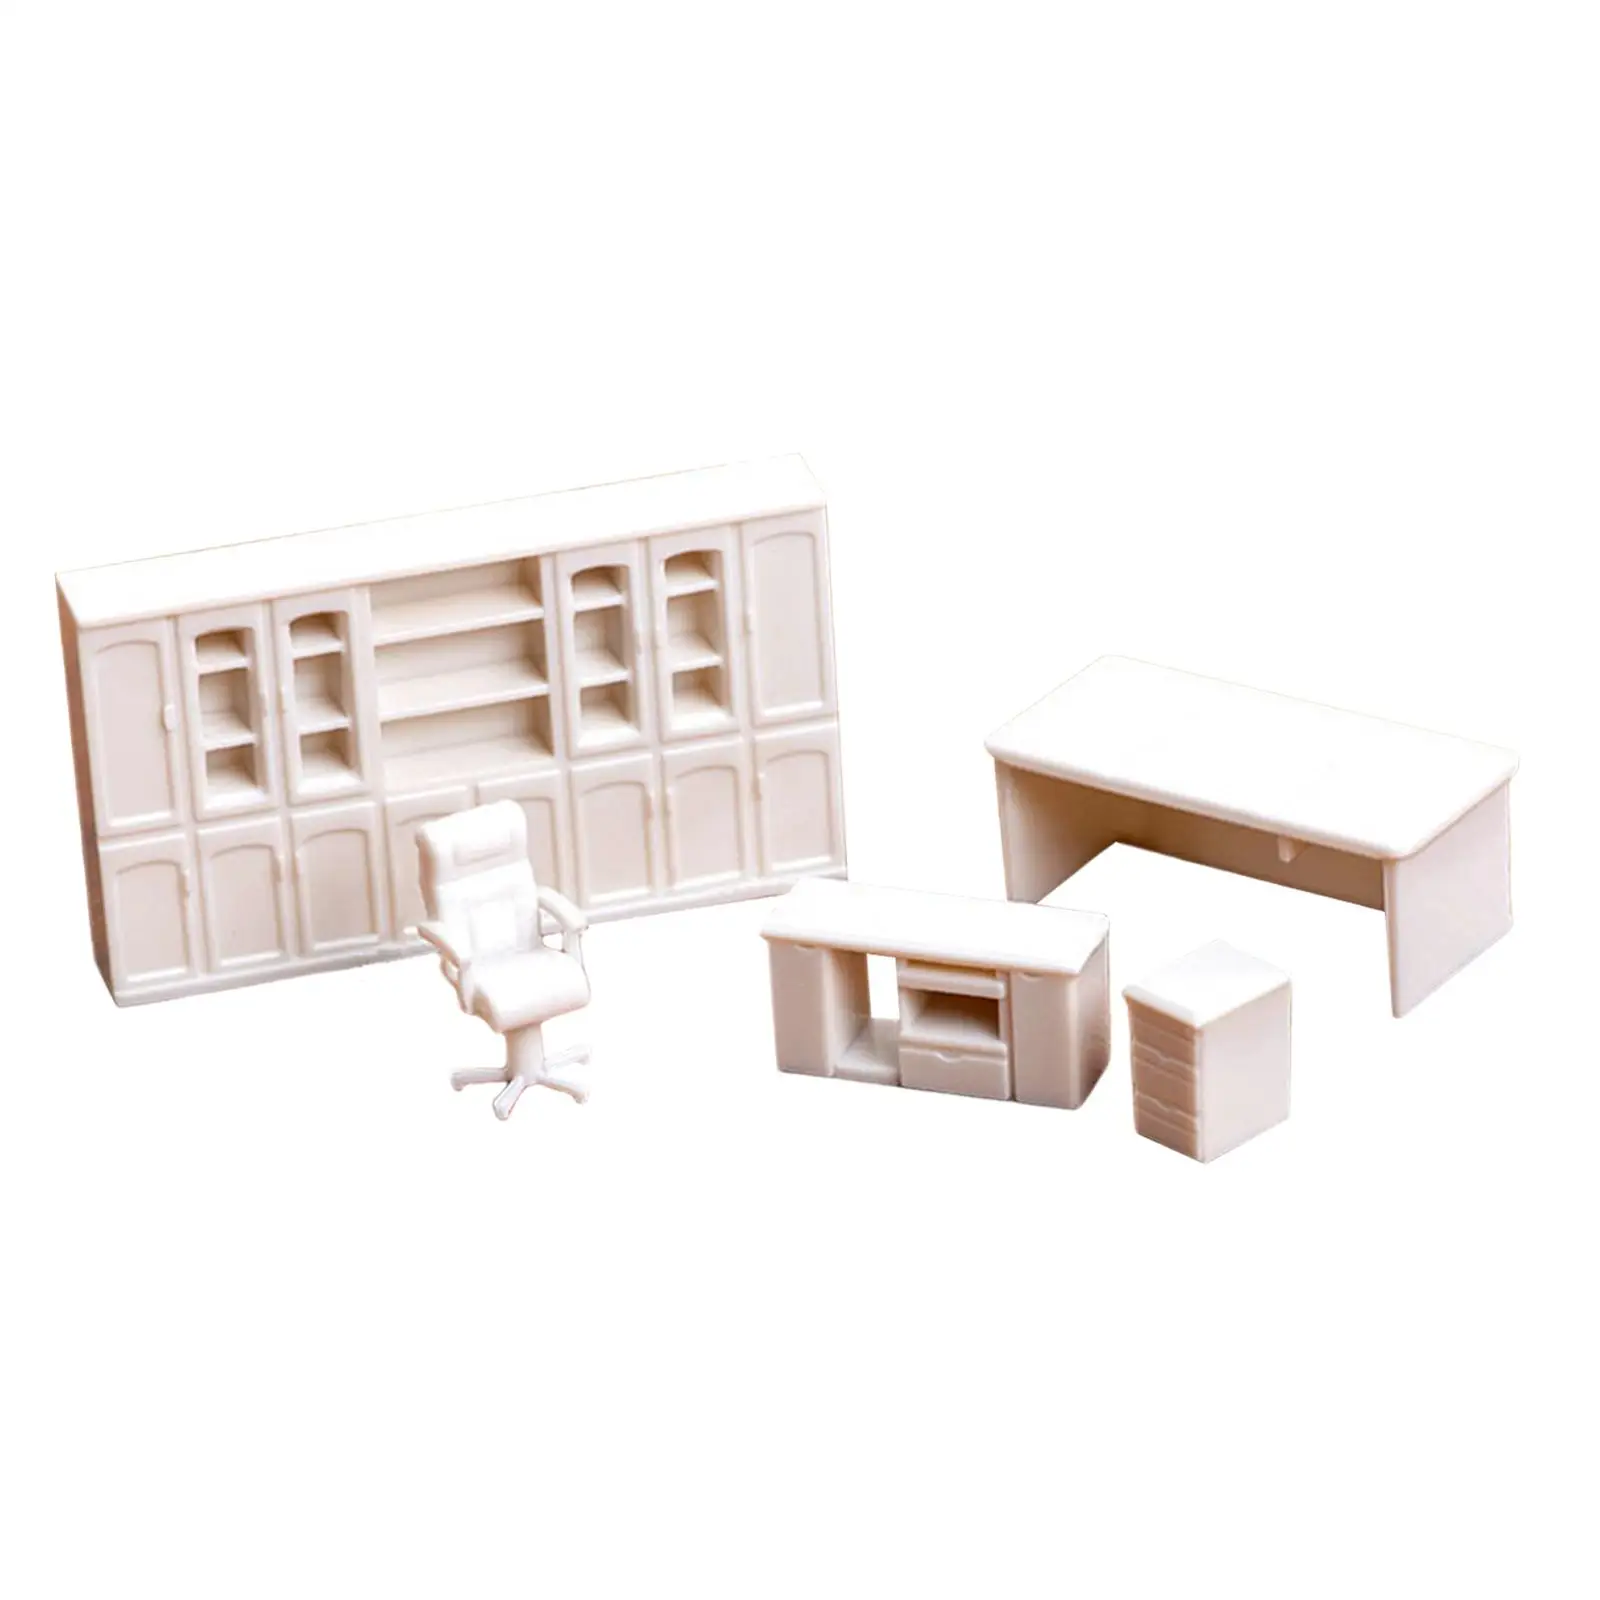 1/50 Scale Furniture Model Miniature 1/50 Furniture Set for Diorama Layout Photo Prop DIY Projects Decor Sand Table Decoration